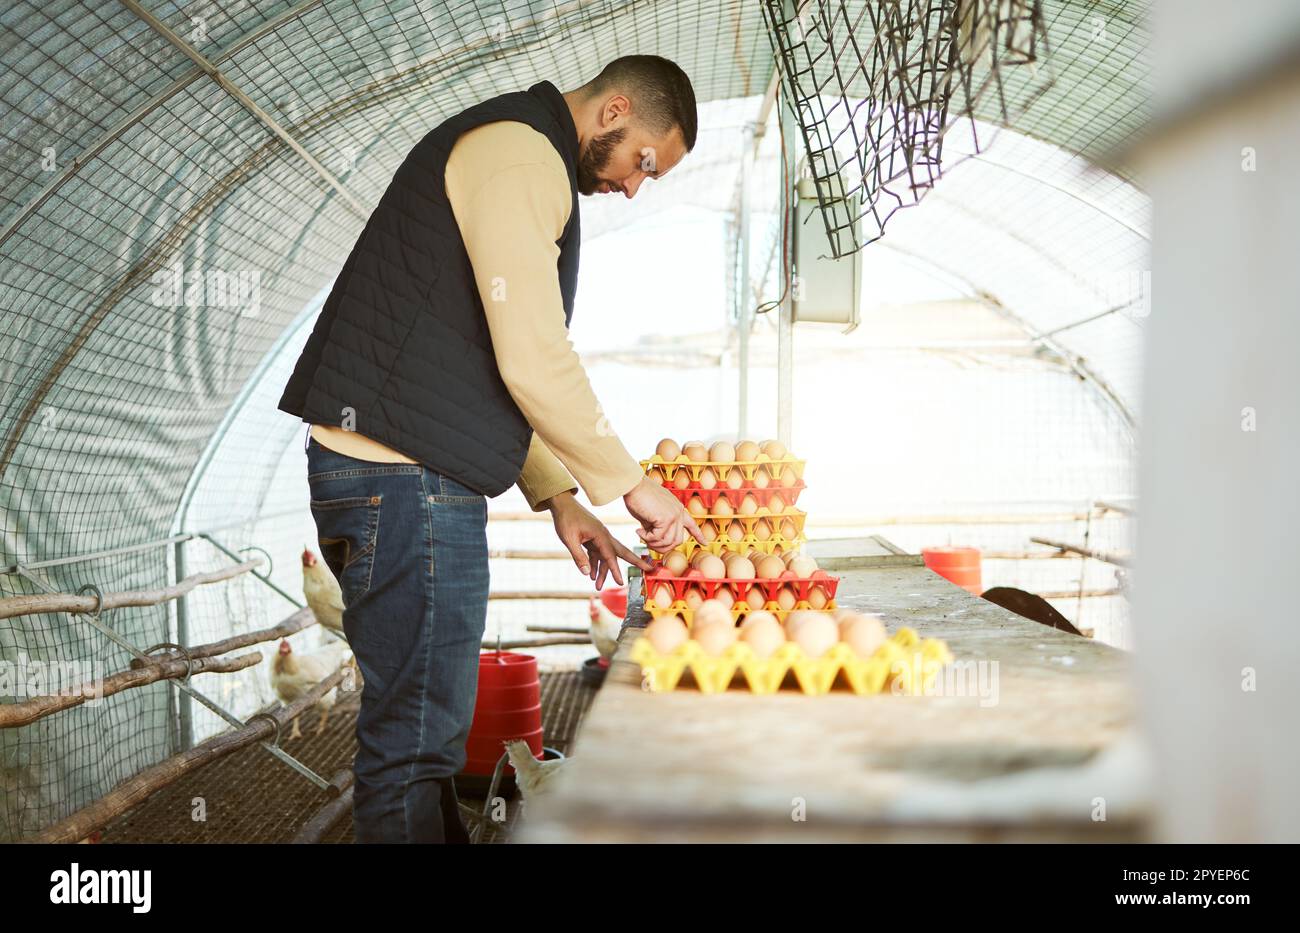 Chicken farmer, eggs and man on farm in barn checking egg quality assessment, tray organization and collection. Harvest, agriculture and poultry farming small business owner working in chicken coop. Stock Photo